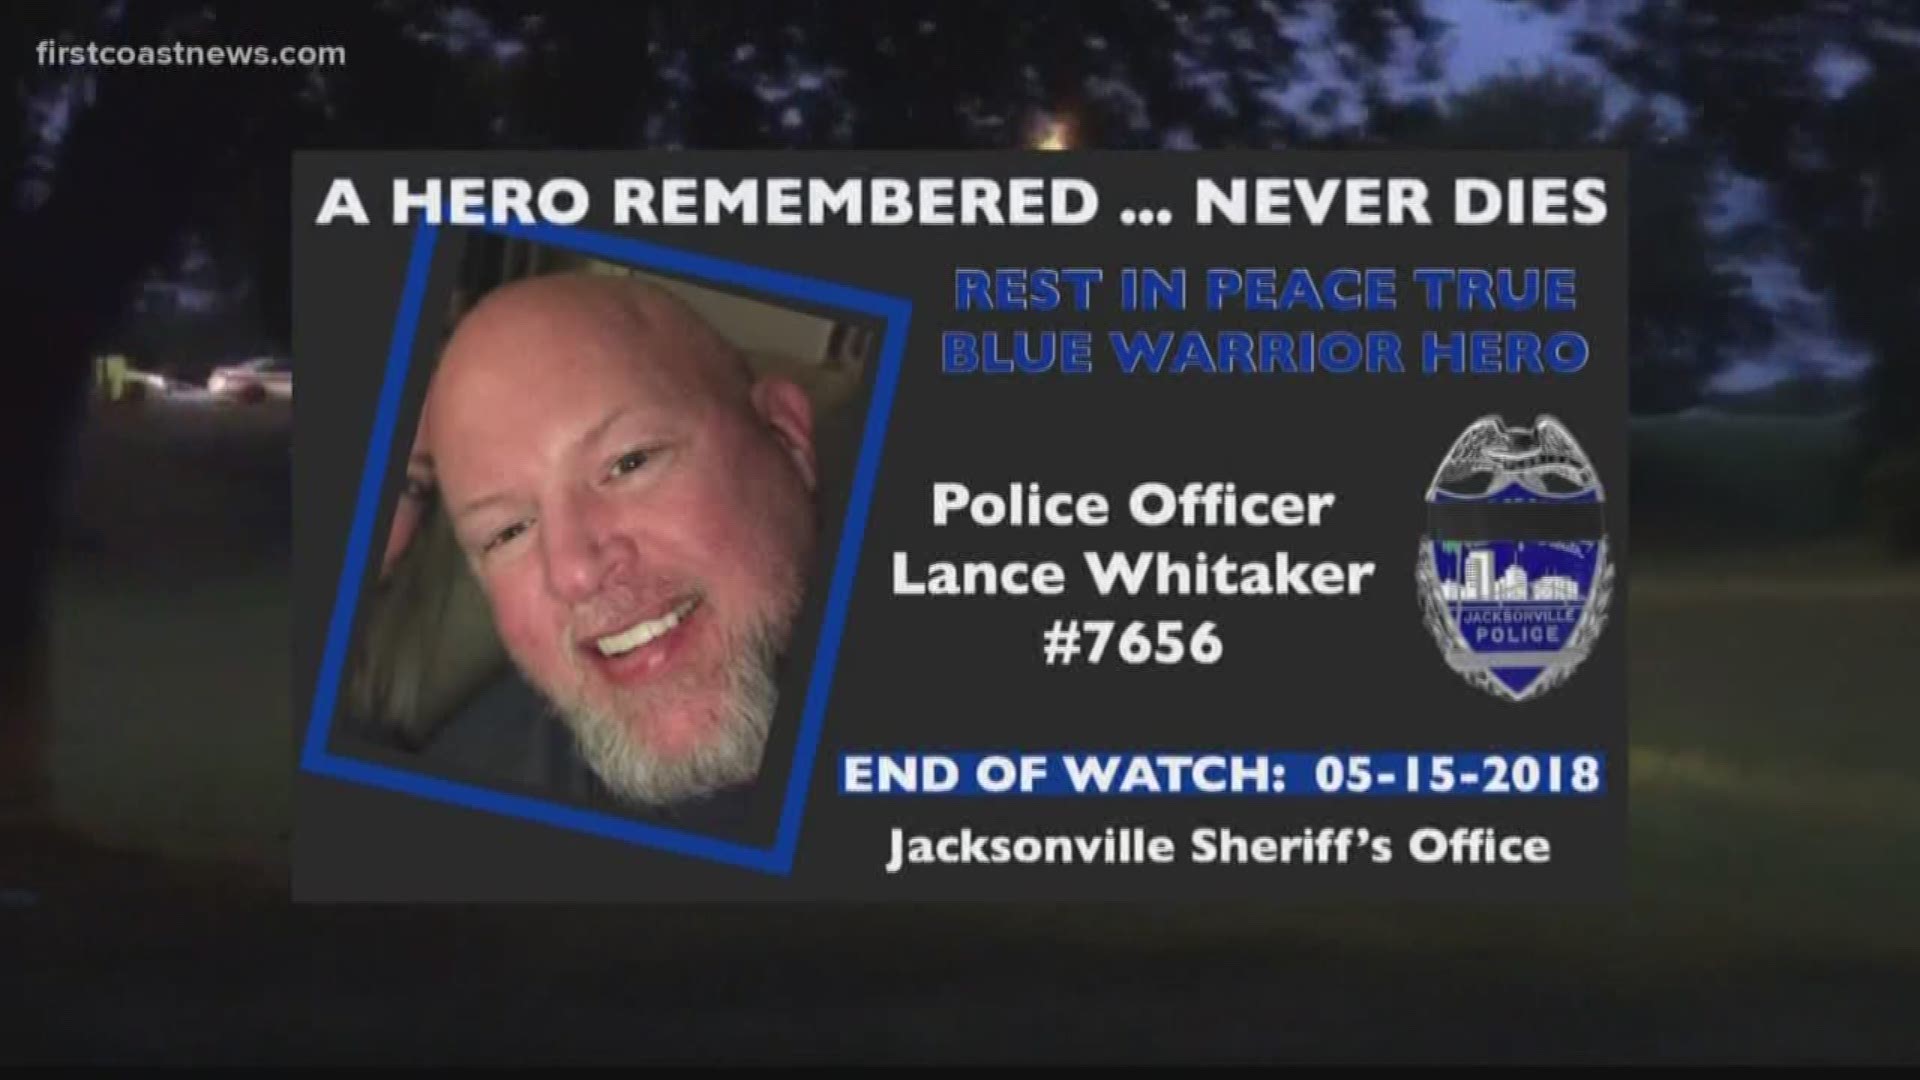 JSO confirmed the officer was Lance C. Whitaker who died in the crash that happened at 4:30 a.m.